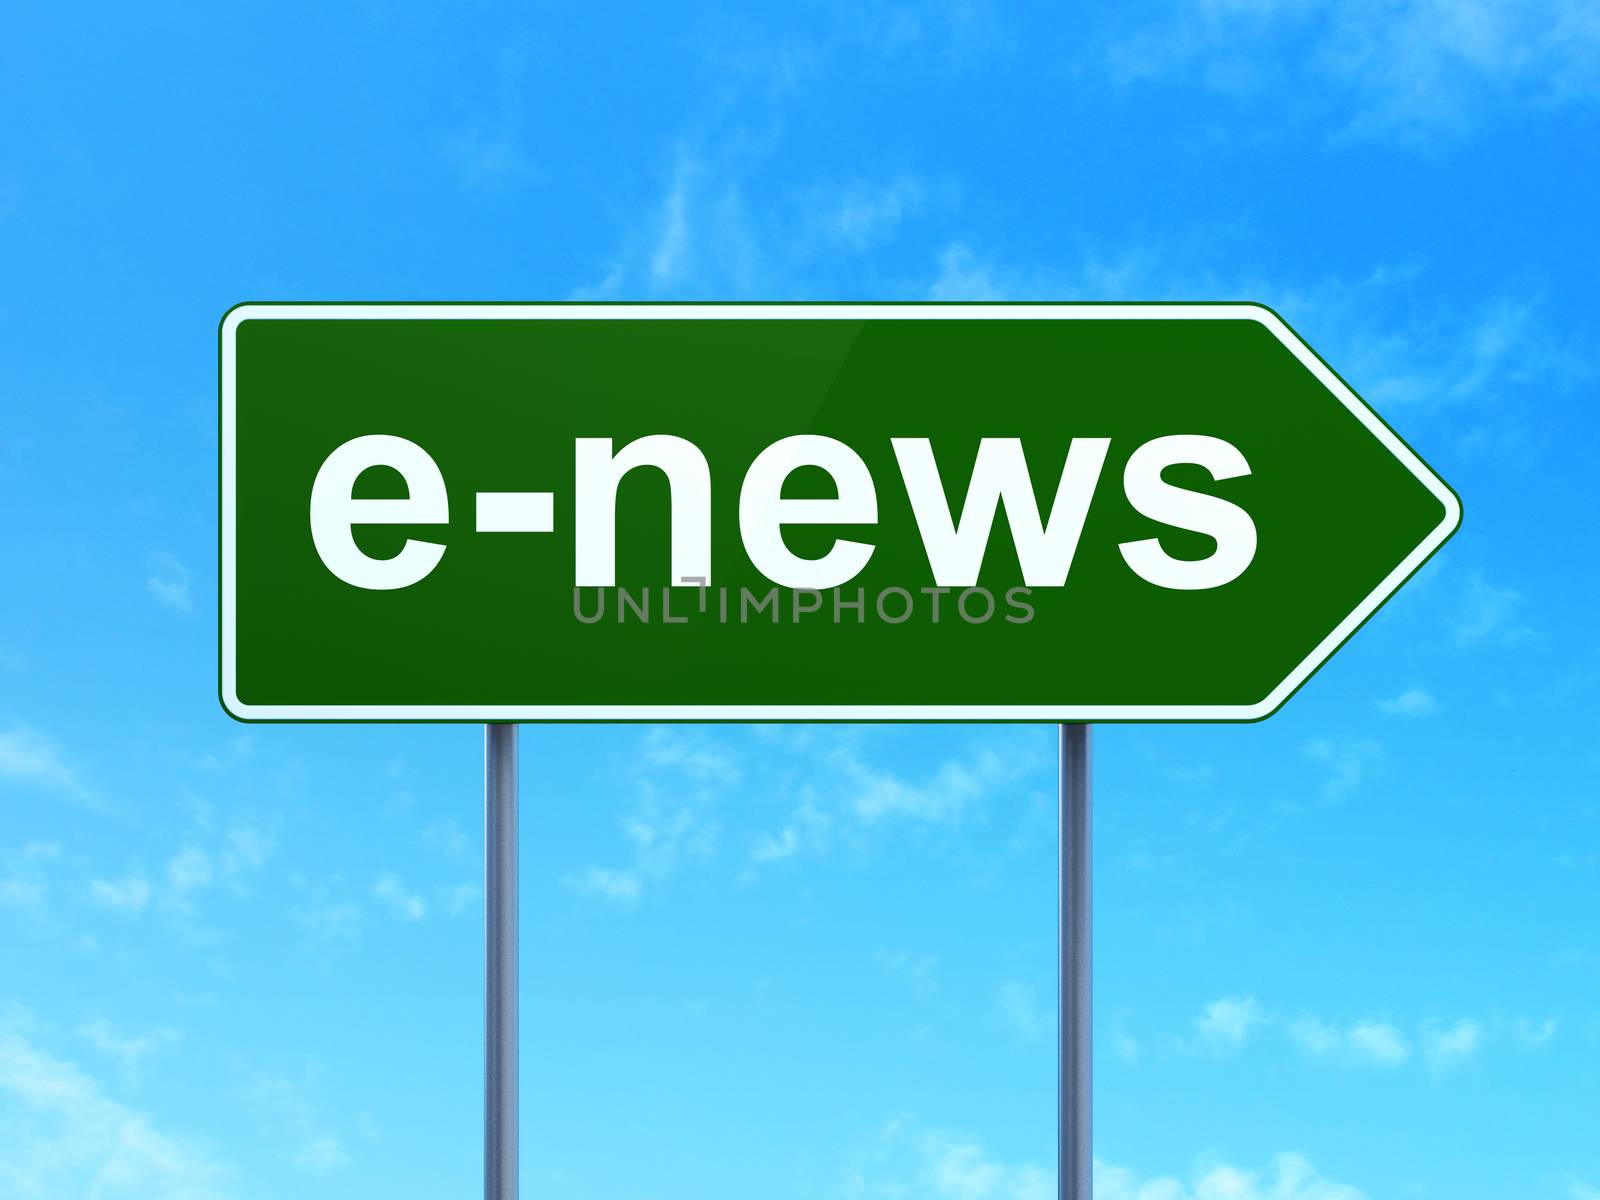 News concept: E-news on green road highway sign, clear blue sky background, 3D rendering